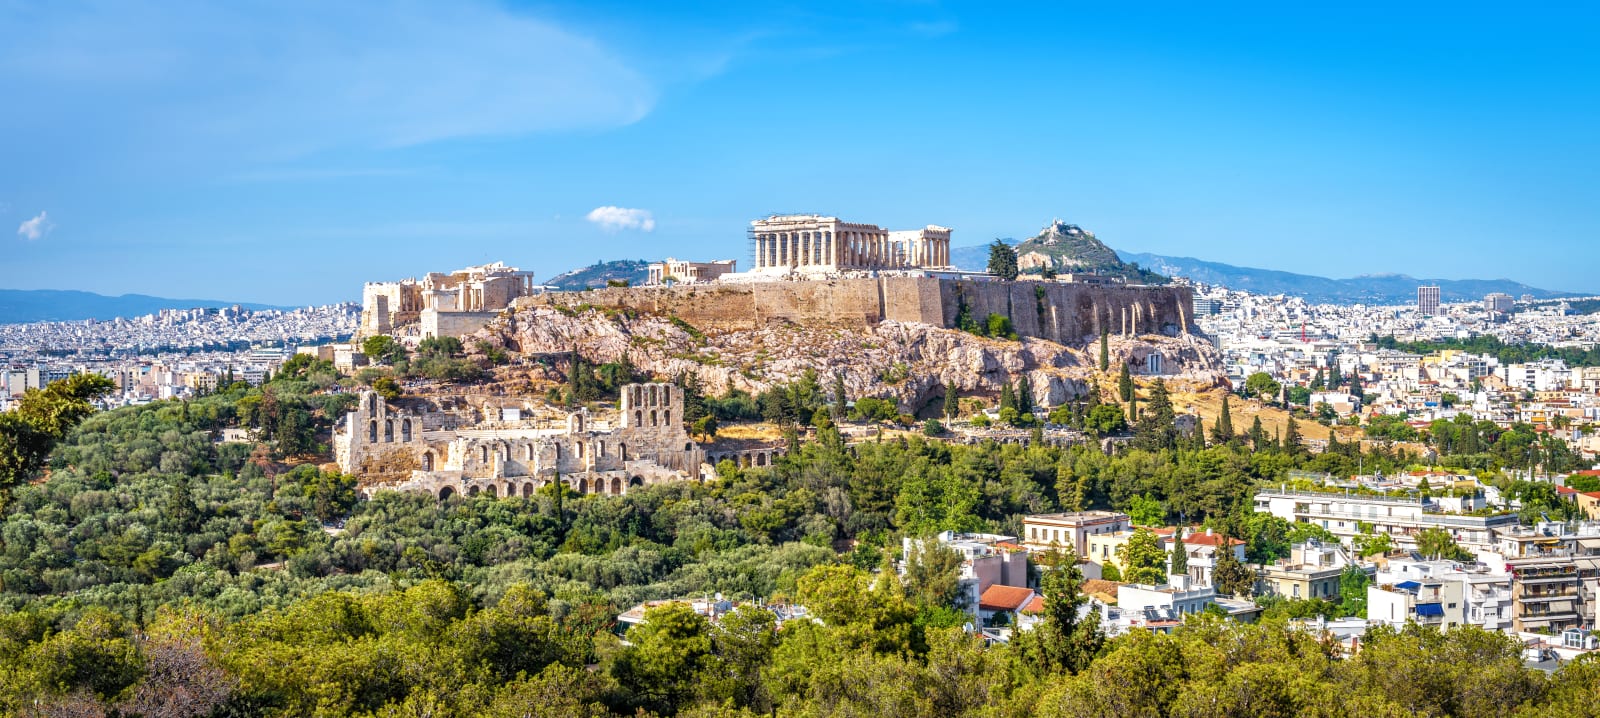 Panorama of Athens with Acropolis hill, Greece. Famous old Acropolis is a top landmark of Athens. Ancient Greek ruins in the Athens center in summer. Scenic view of remains of antique Athens city.